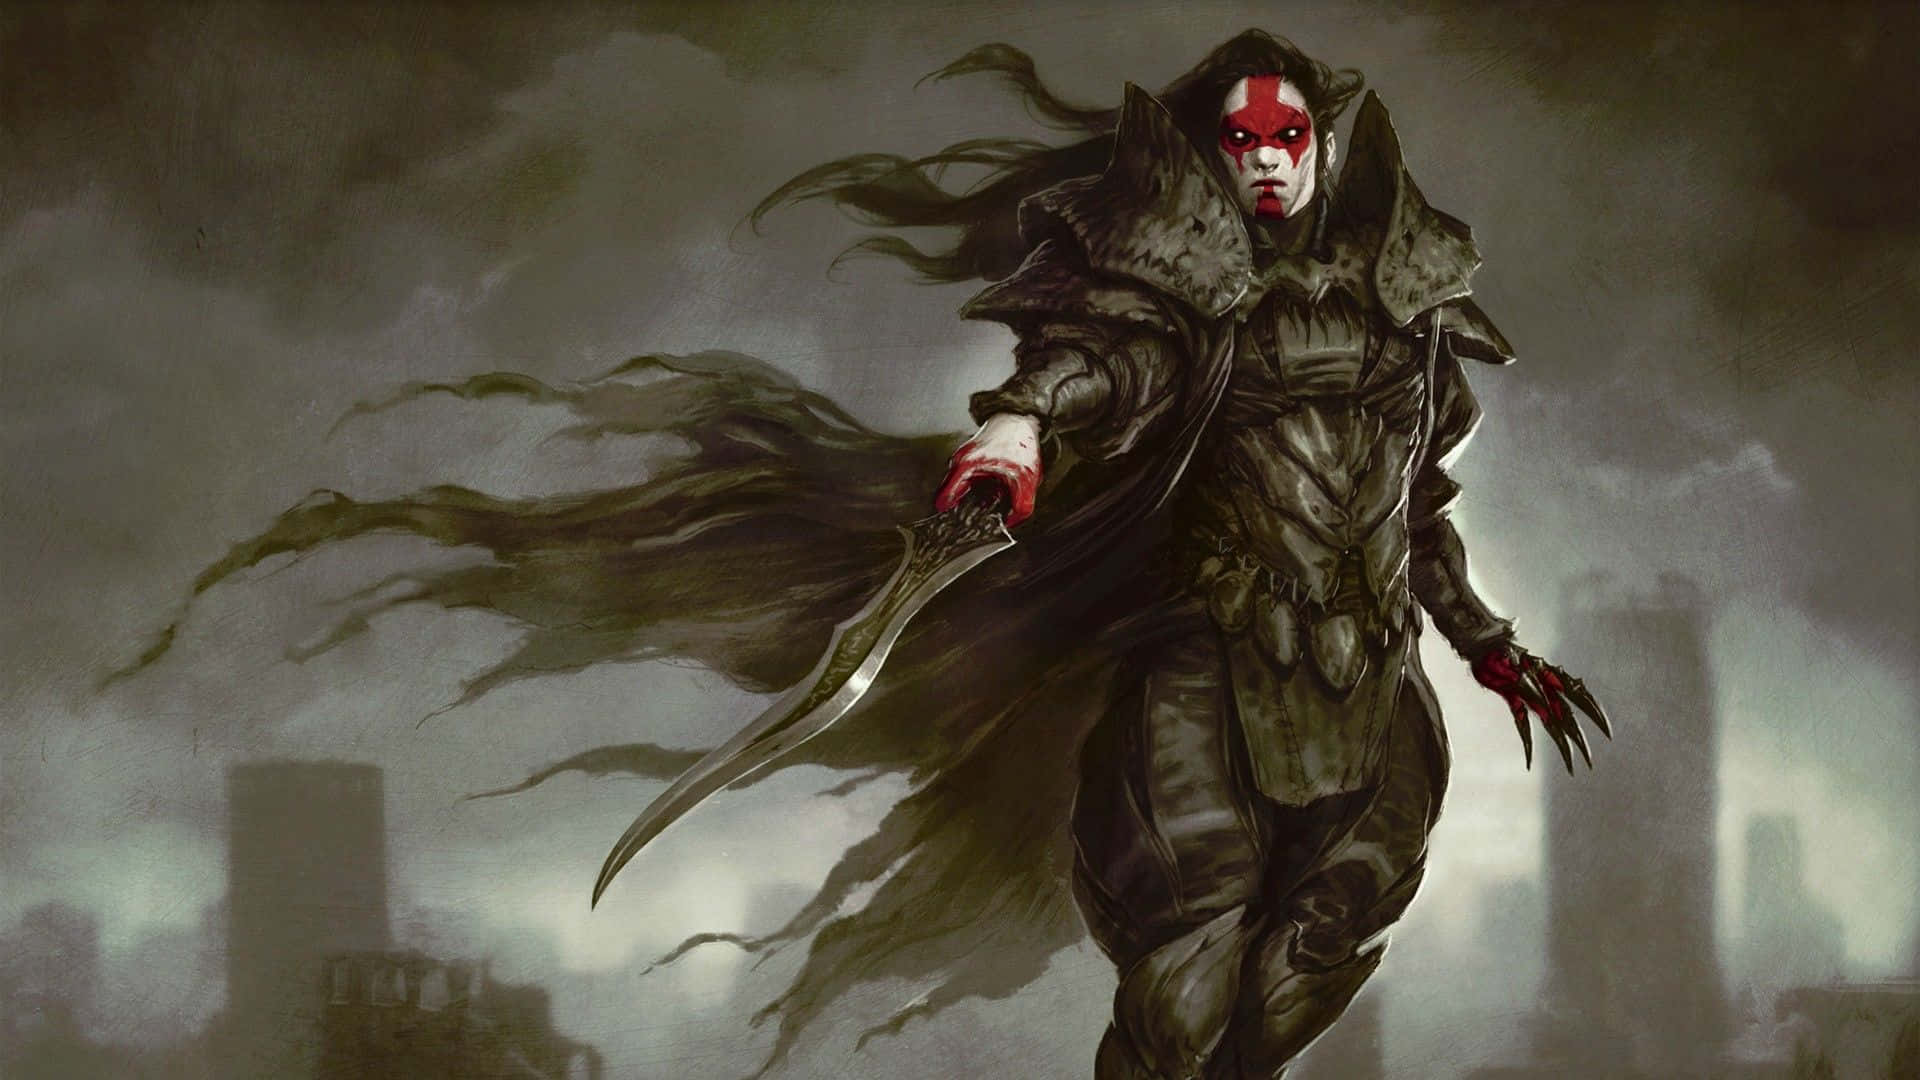 A Dark Fantasy Character With A Sword And A Mask